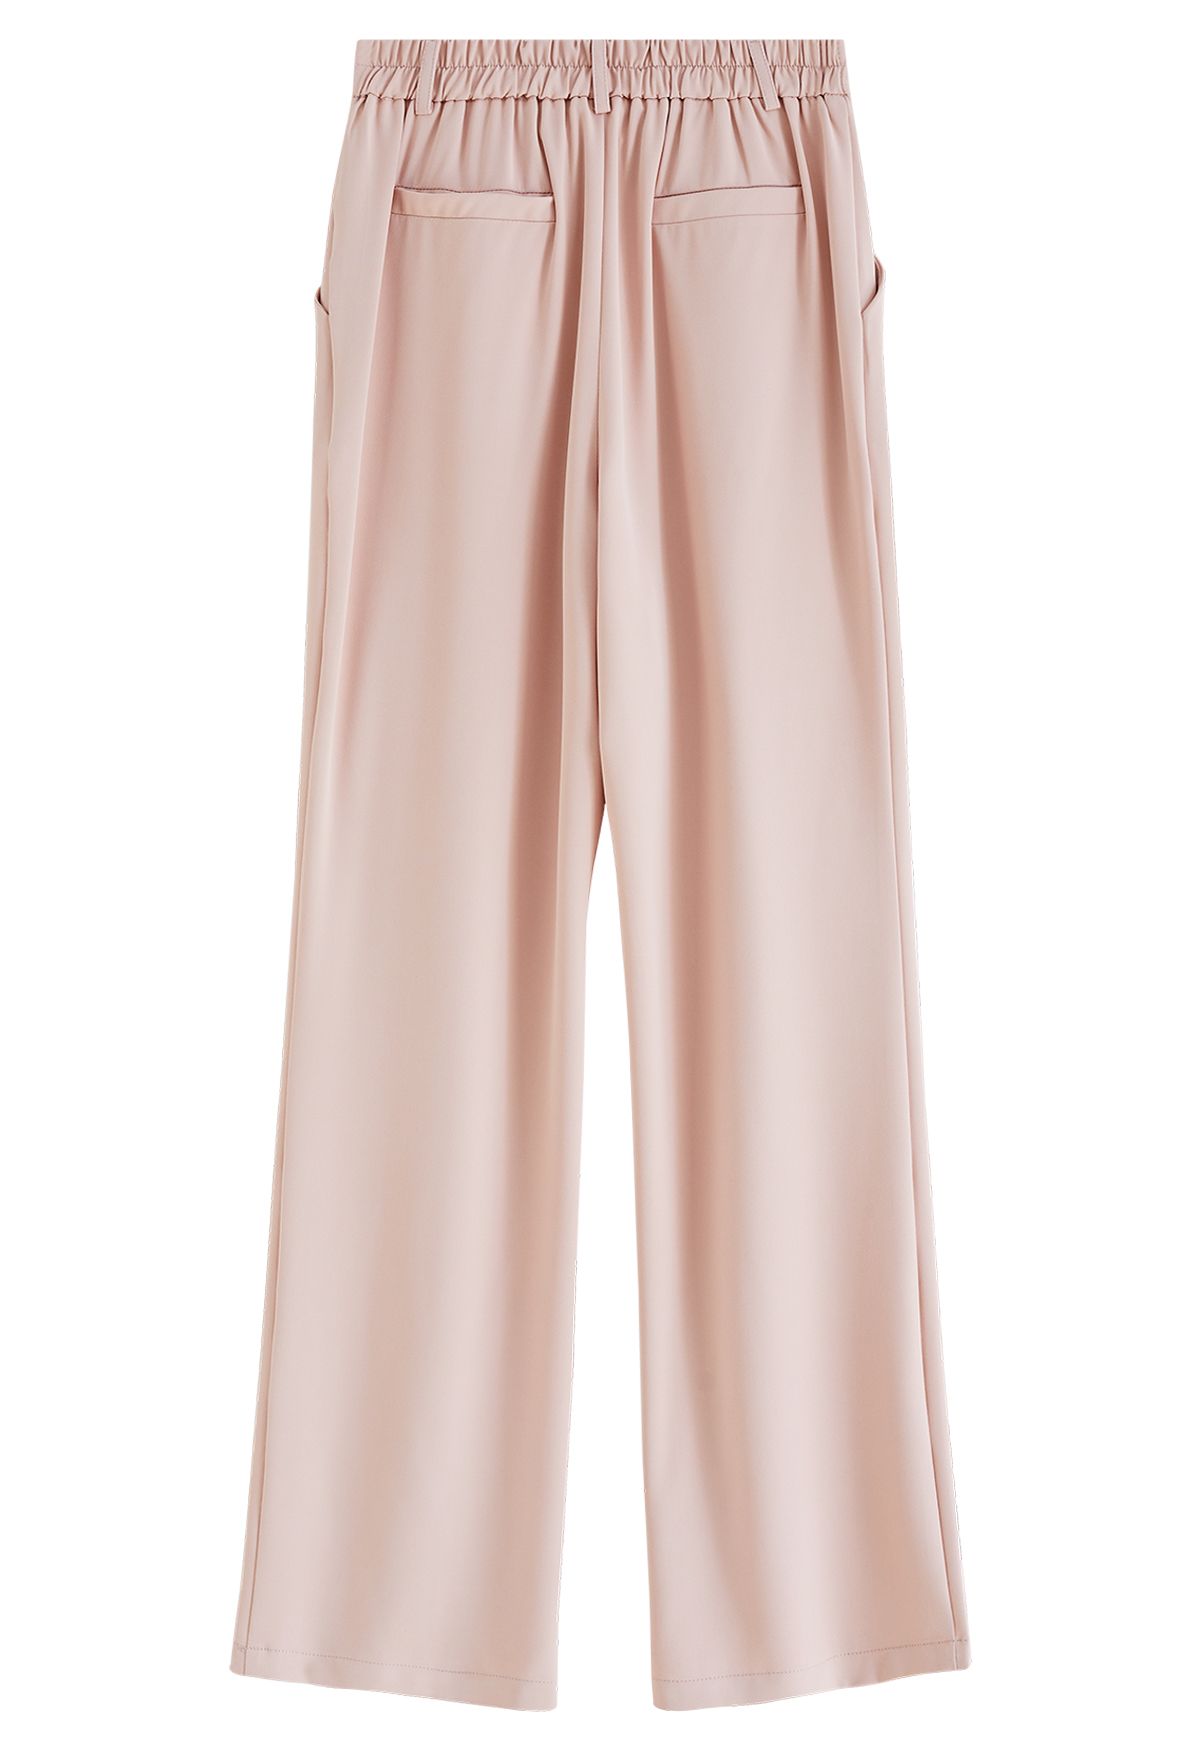 Pleated Detail Straight Leg Pants in Pink - Retro, Indie and Unique Fashion